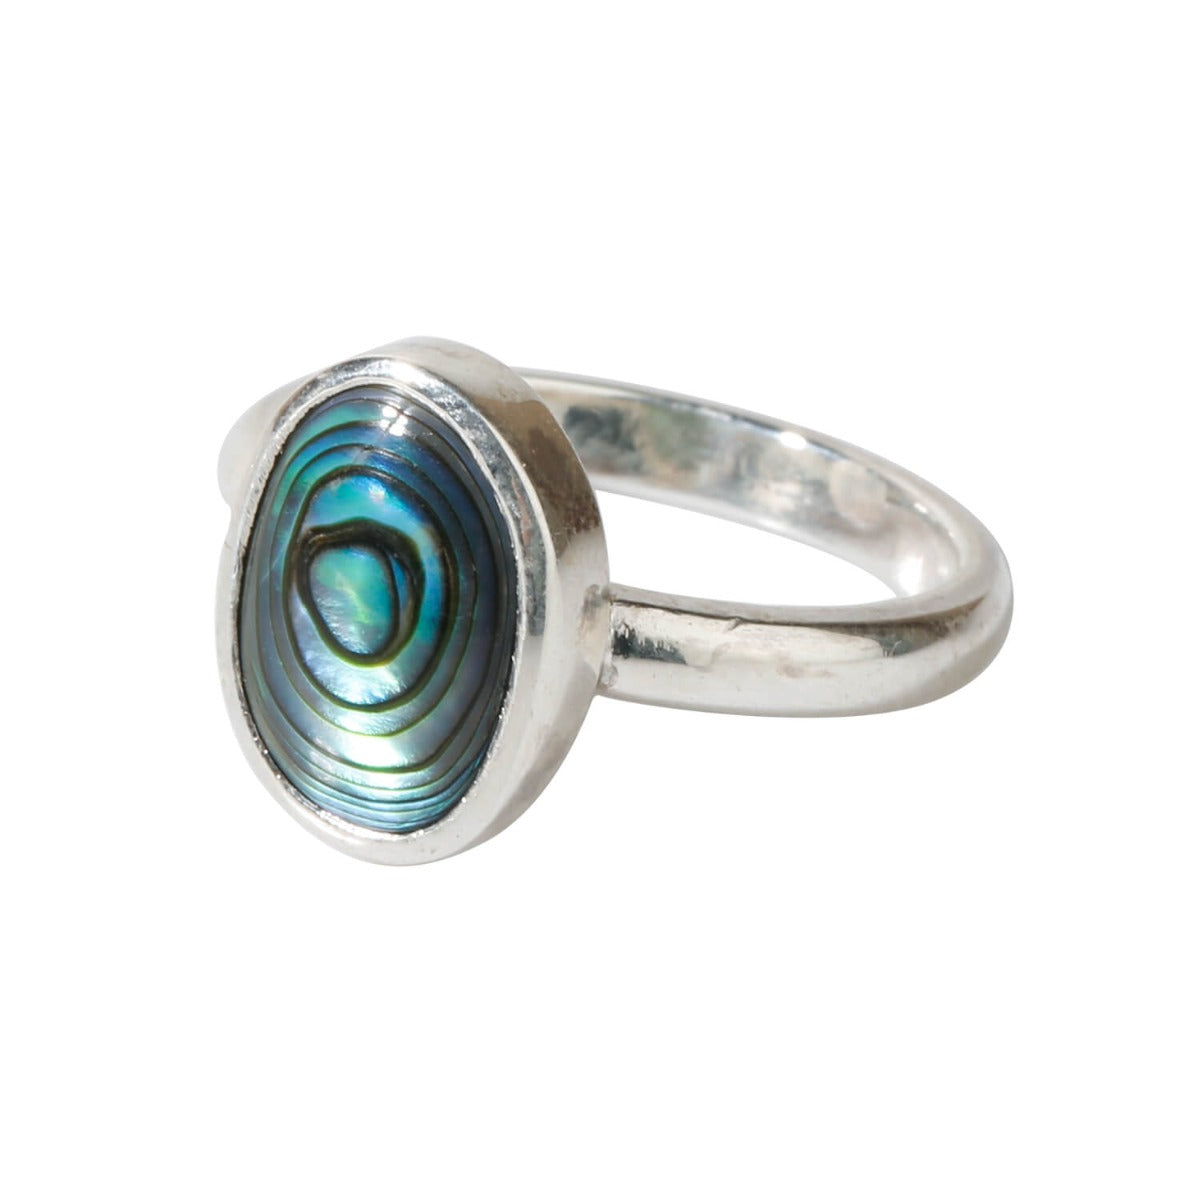 Sterling Silver oval Shape Ring With Abalone Shell